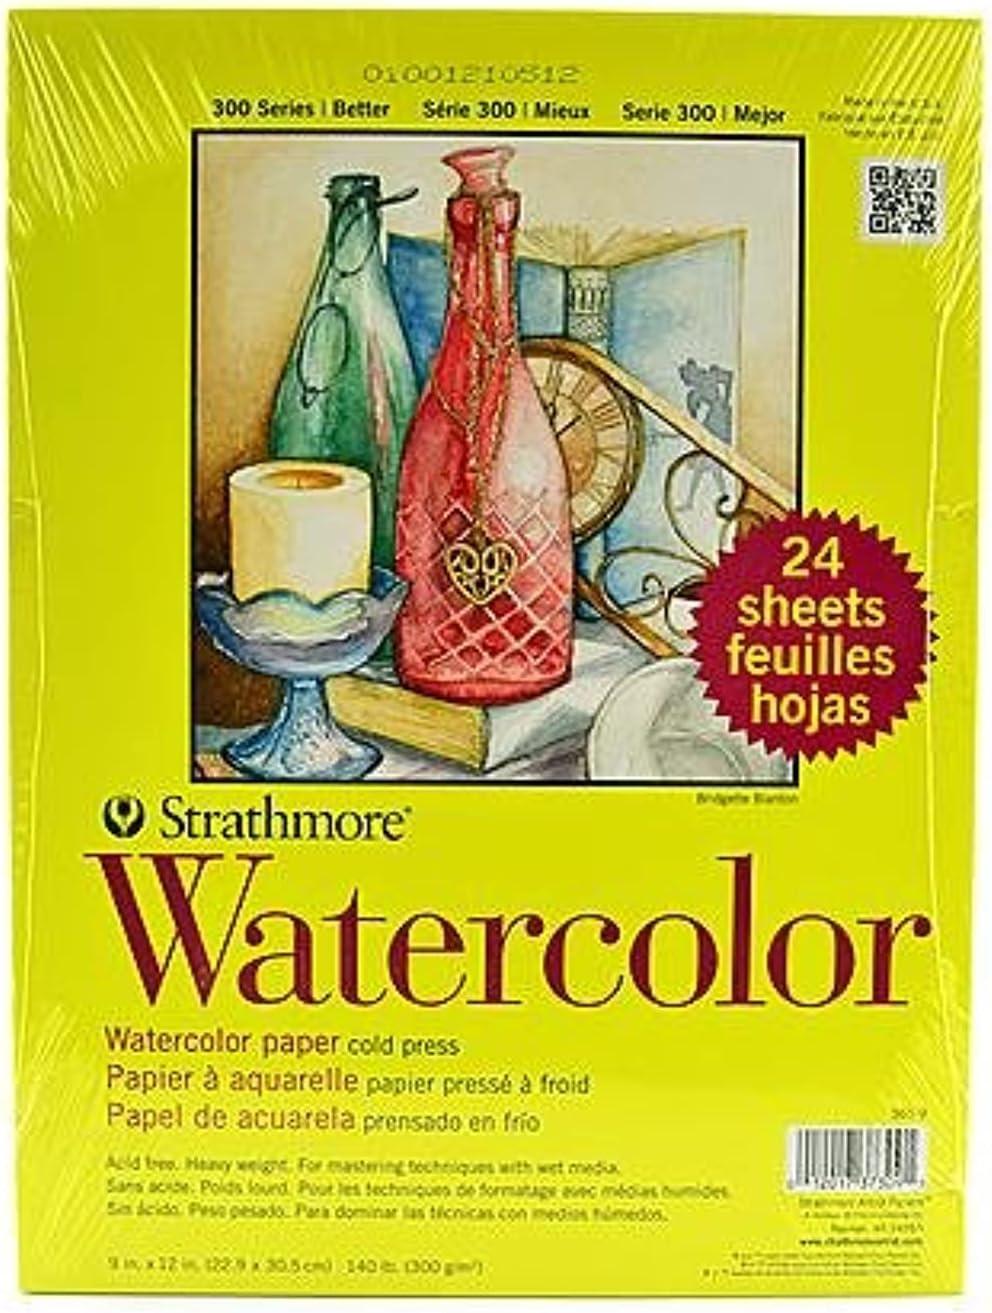 Strathmore 300 Series Watercolor Paper Pad, 9x12 inches, 24 Sheets  (140lb/300g) - Artist Paper for Adults and Students - Watercolors, Mixed  Media, Markers and Art Journaling 9x12 Sheet Pack Paper Pad